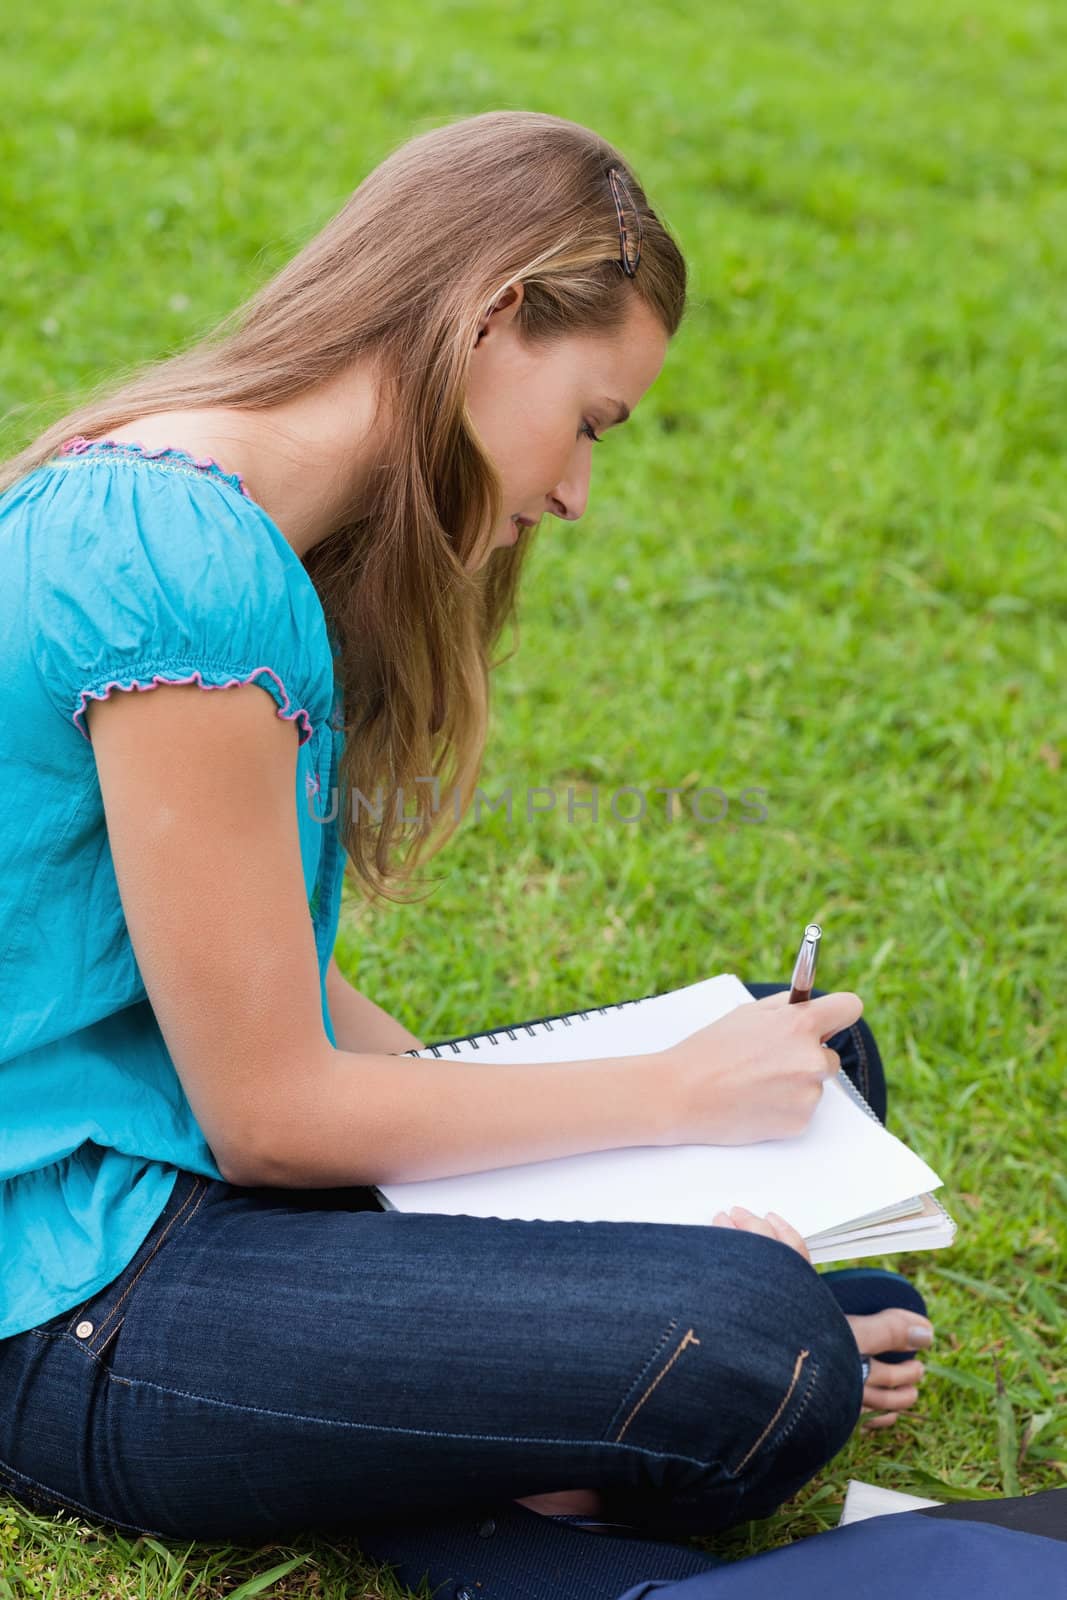 Young girl writing on her notebook while sitting down on the grass in the countryside